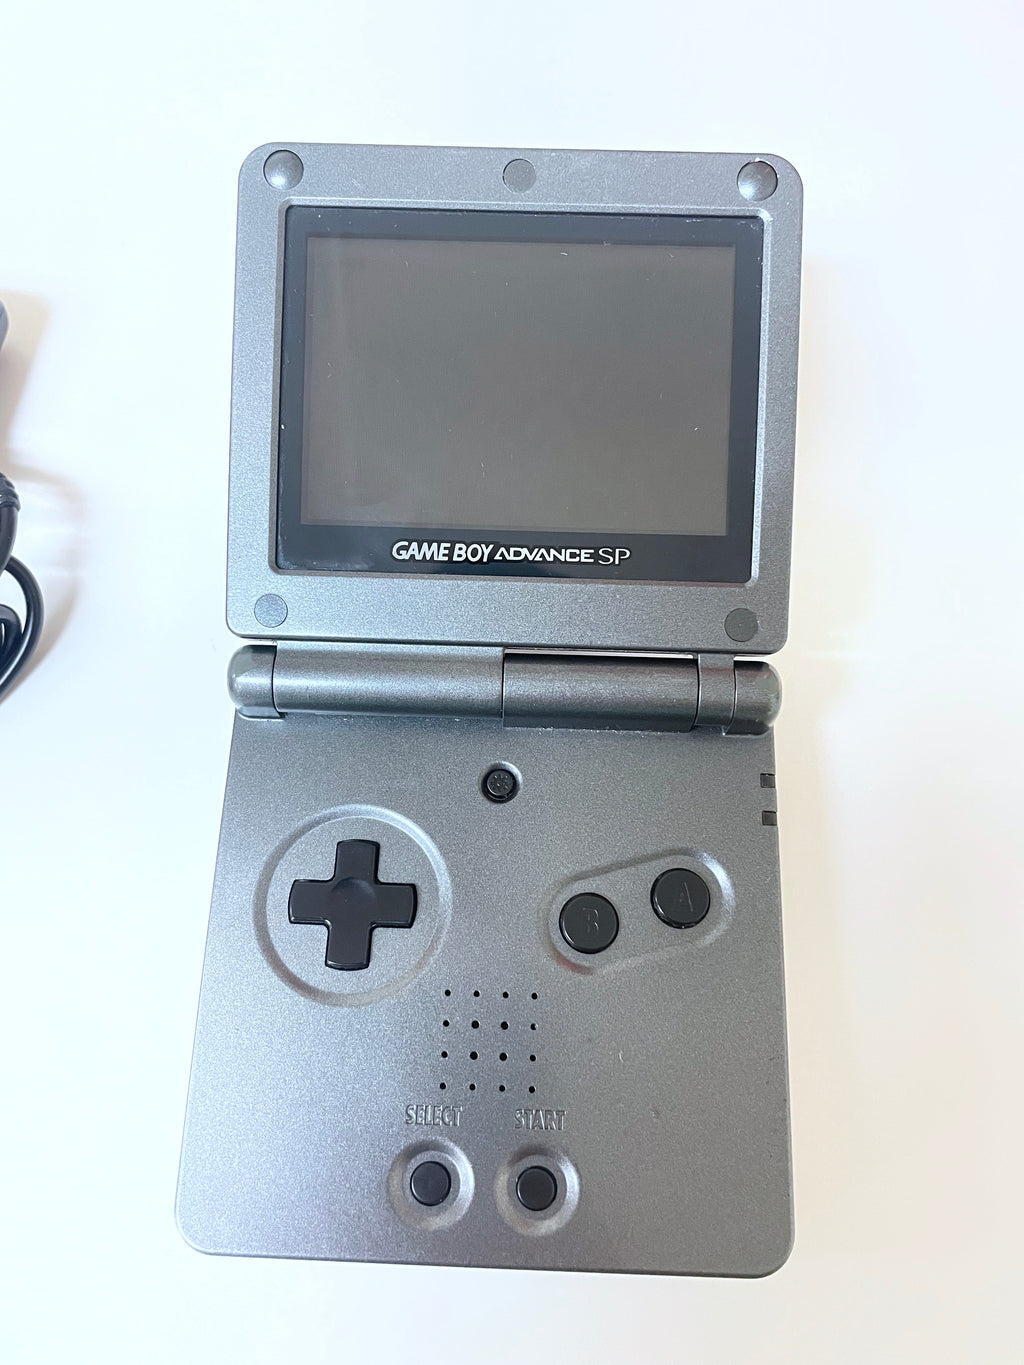 Nintendo Gameboy Advance SP Handheld Gba Sp AGS 001charger 